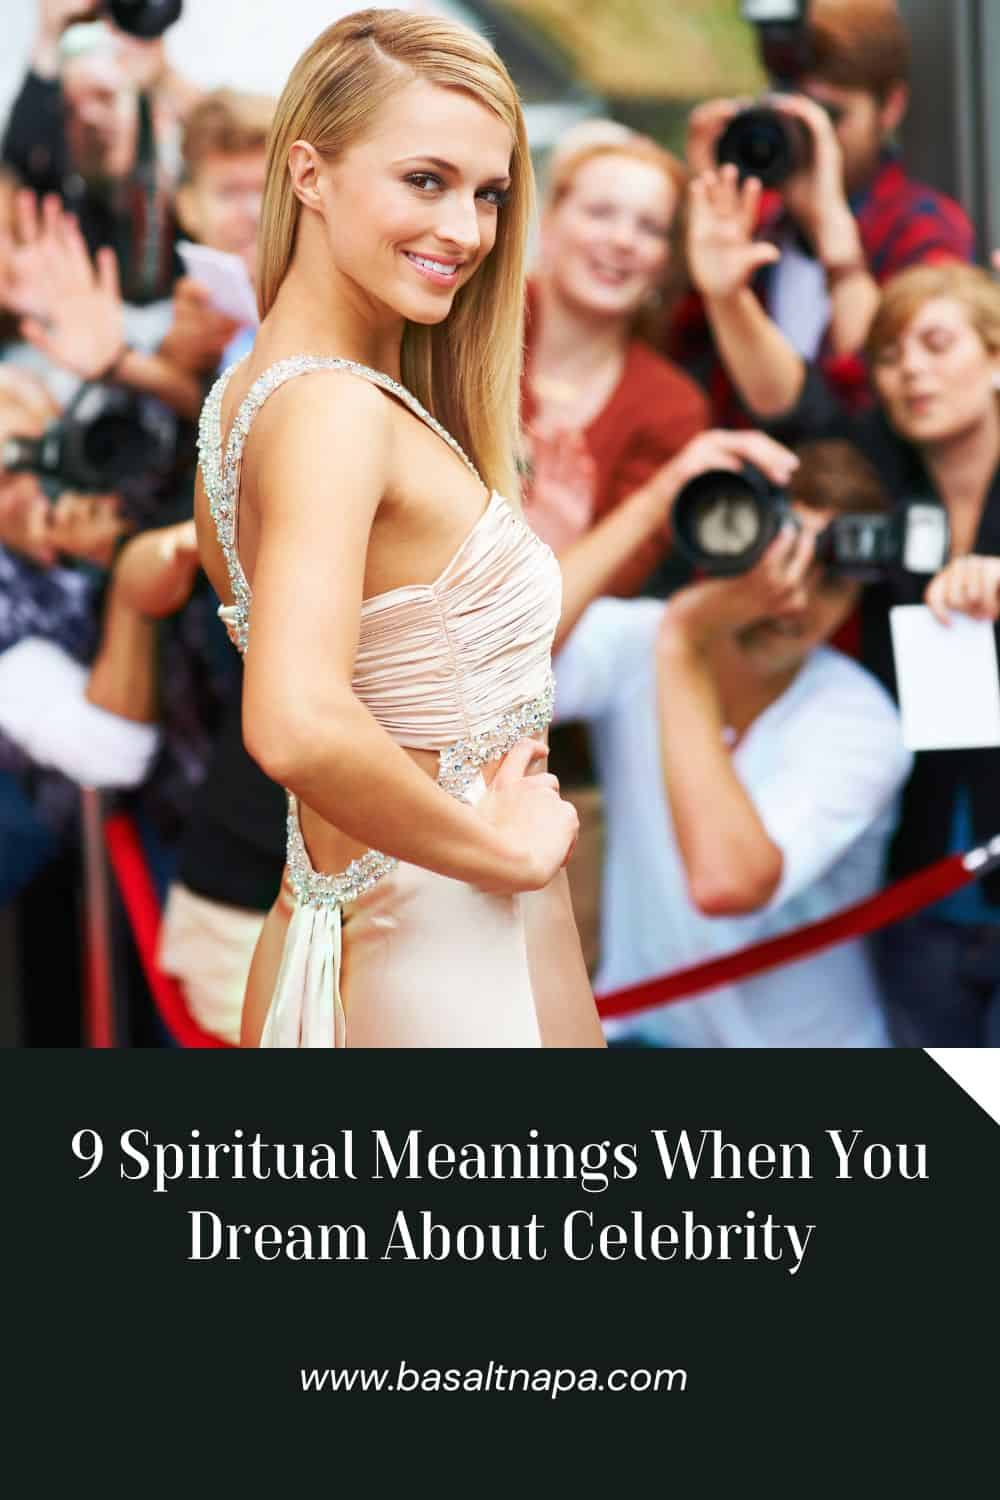 9 Spiritual Meanings When You Dream About Celebrity